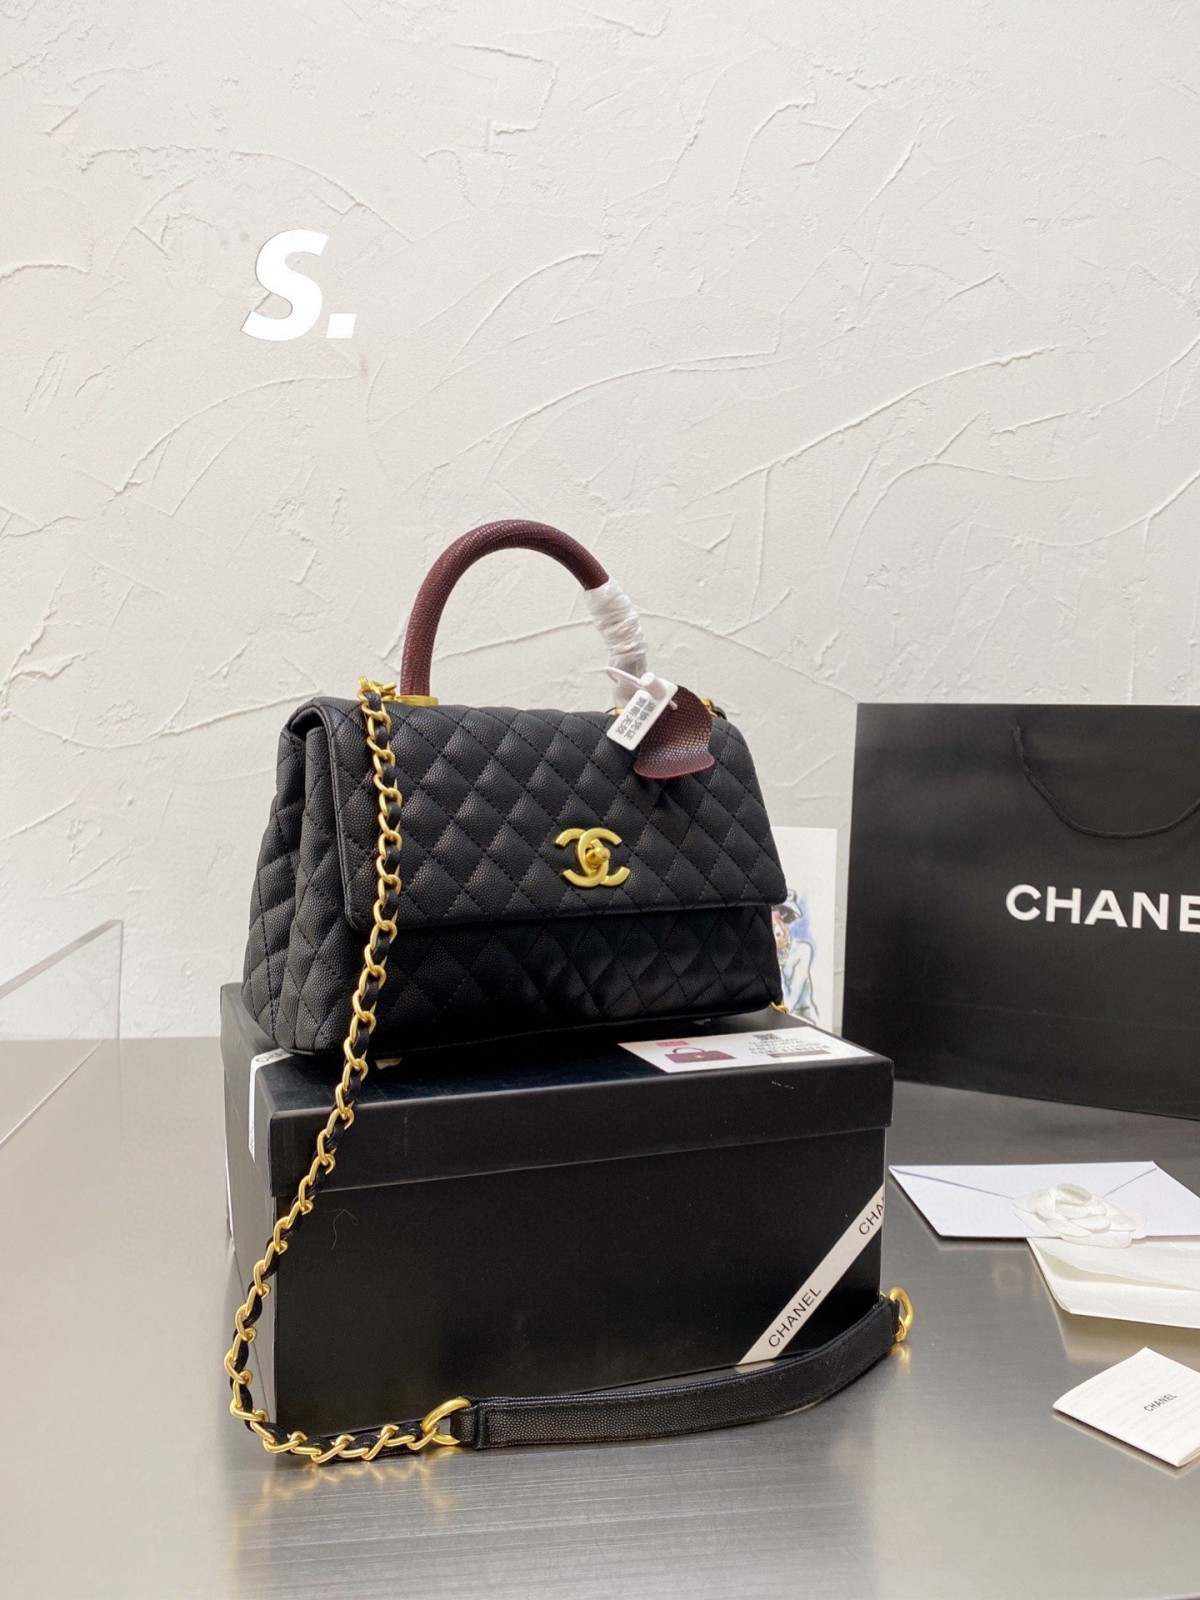 The quality of Chanel Coco Handle replica bag is on par with the real thing! (2022 Updated)-Best Quality Fake Louis Vuitton Bag Online Store, Replica designer bag ru